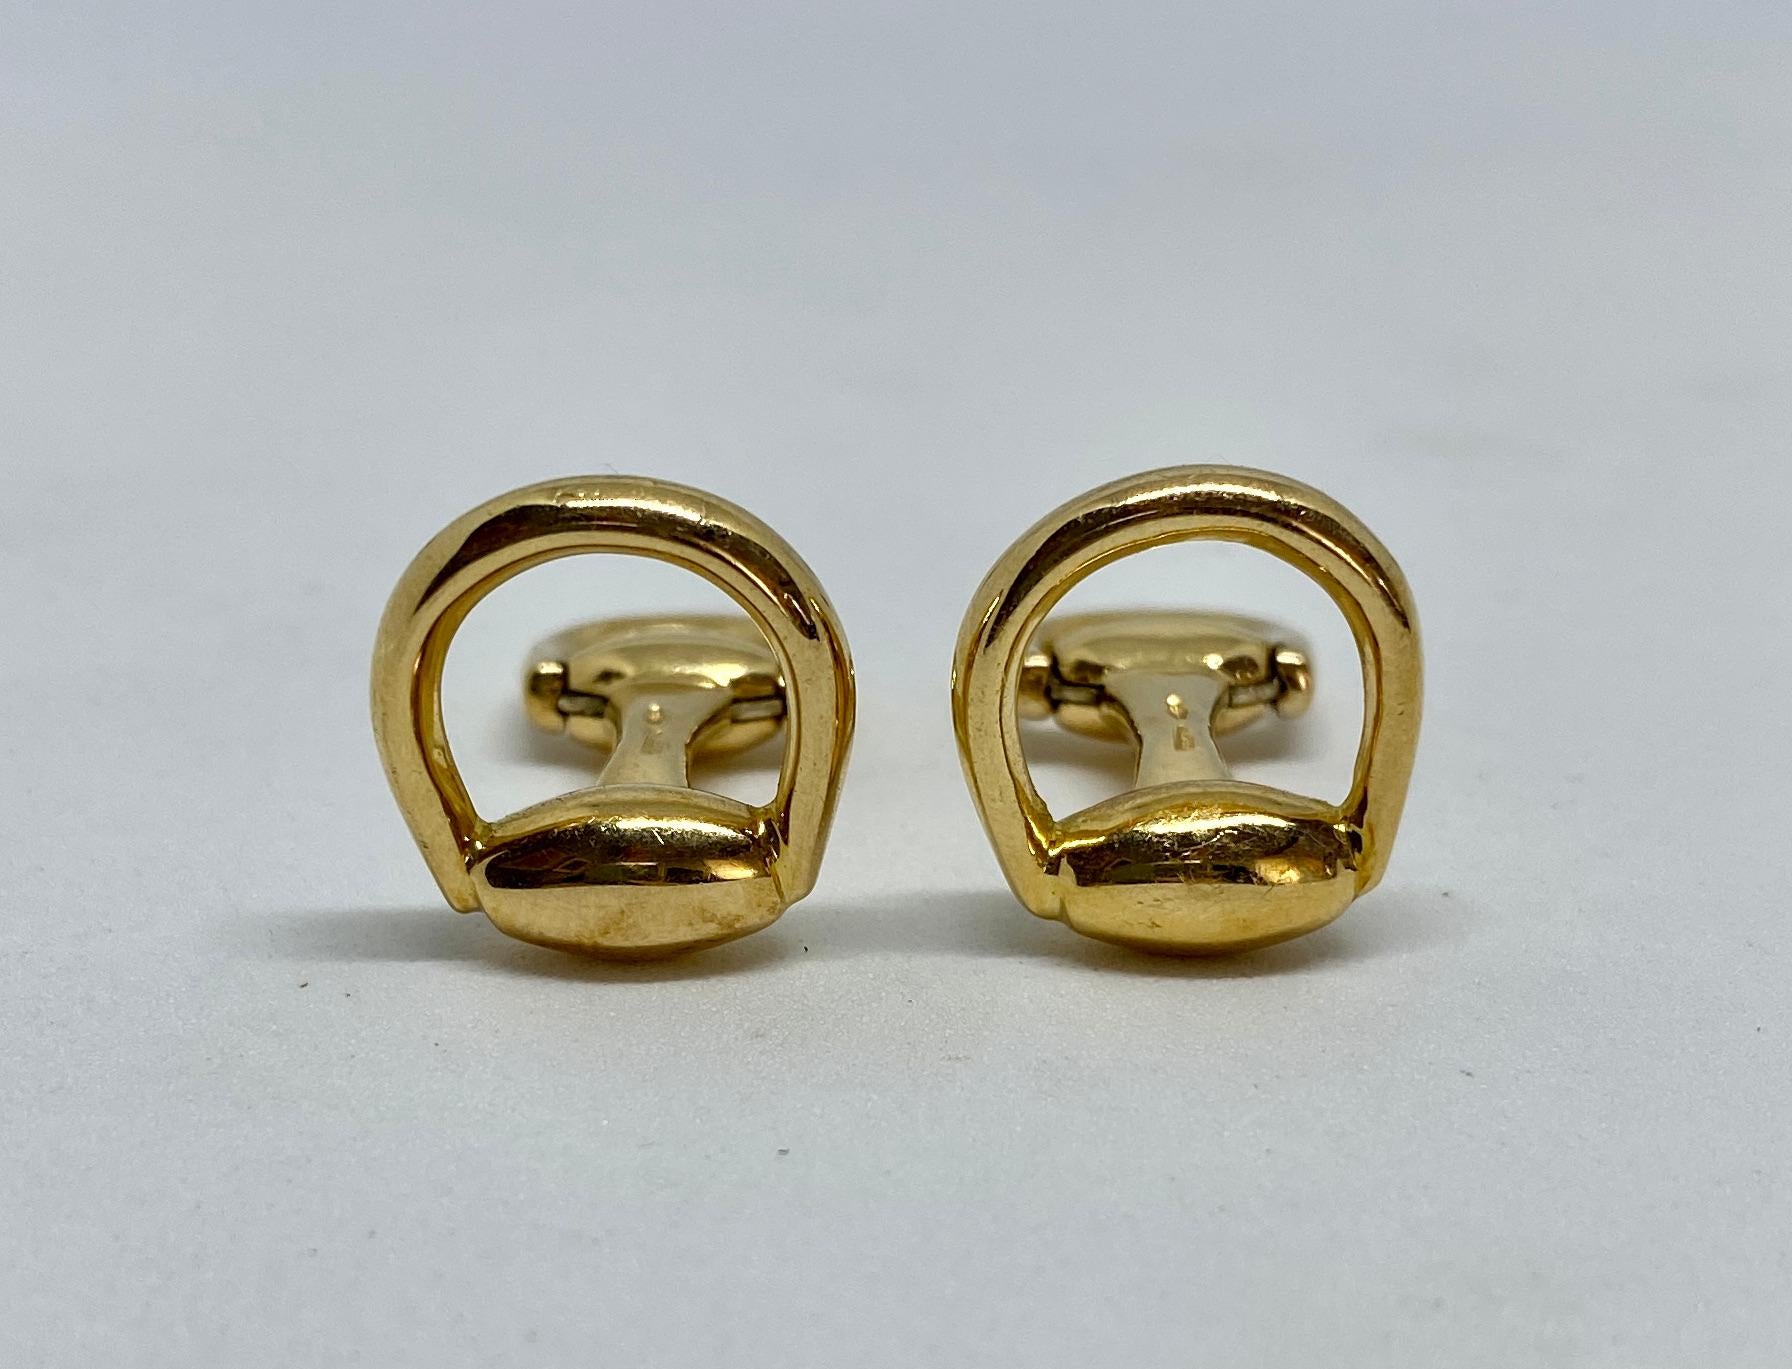 Classic Gucci cufflinks in excellent pre-owned condition featuring the snaffle / horsebit design with hinged backs, making them easy to insert and remove from buttonholes.

Signed Gucci, Made in Italy, 750 indicating the gold purity, the maker's